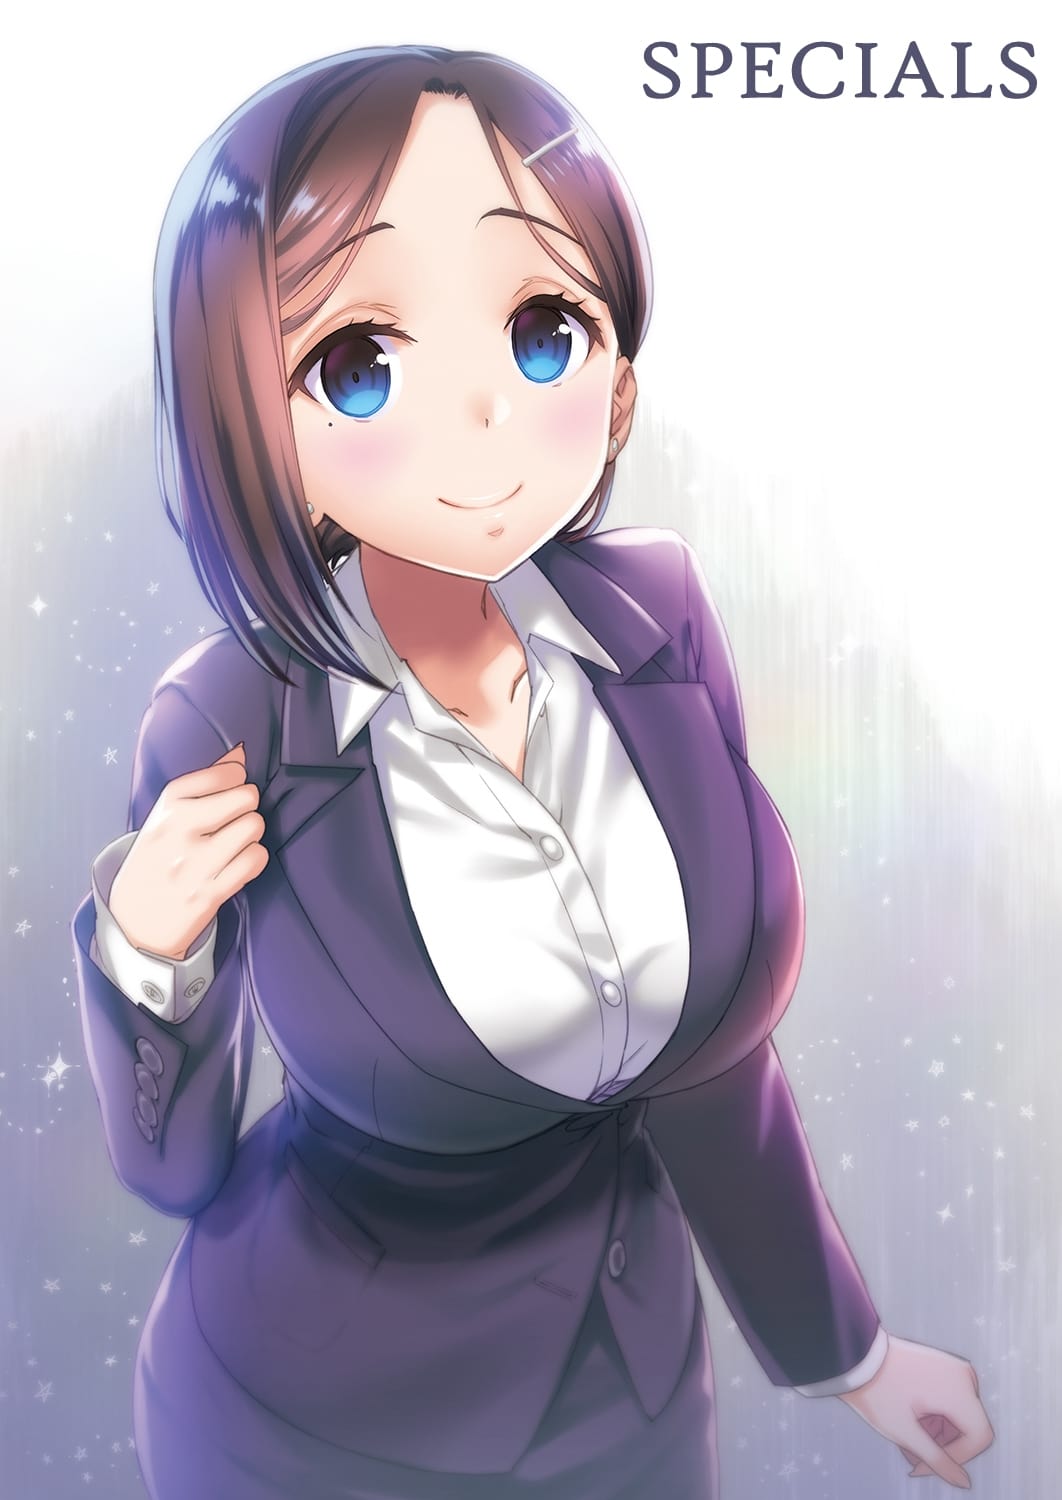 Watch Tawawa on Monday · Season 1 Episode 2 · A Reliable Yet Clumsy Junior  Full Episode Online - Plex